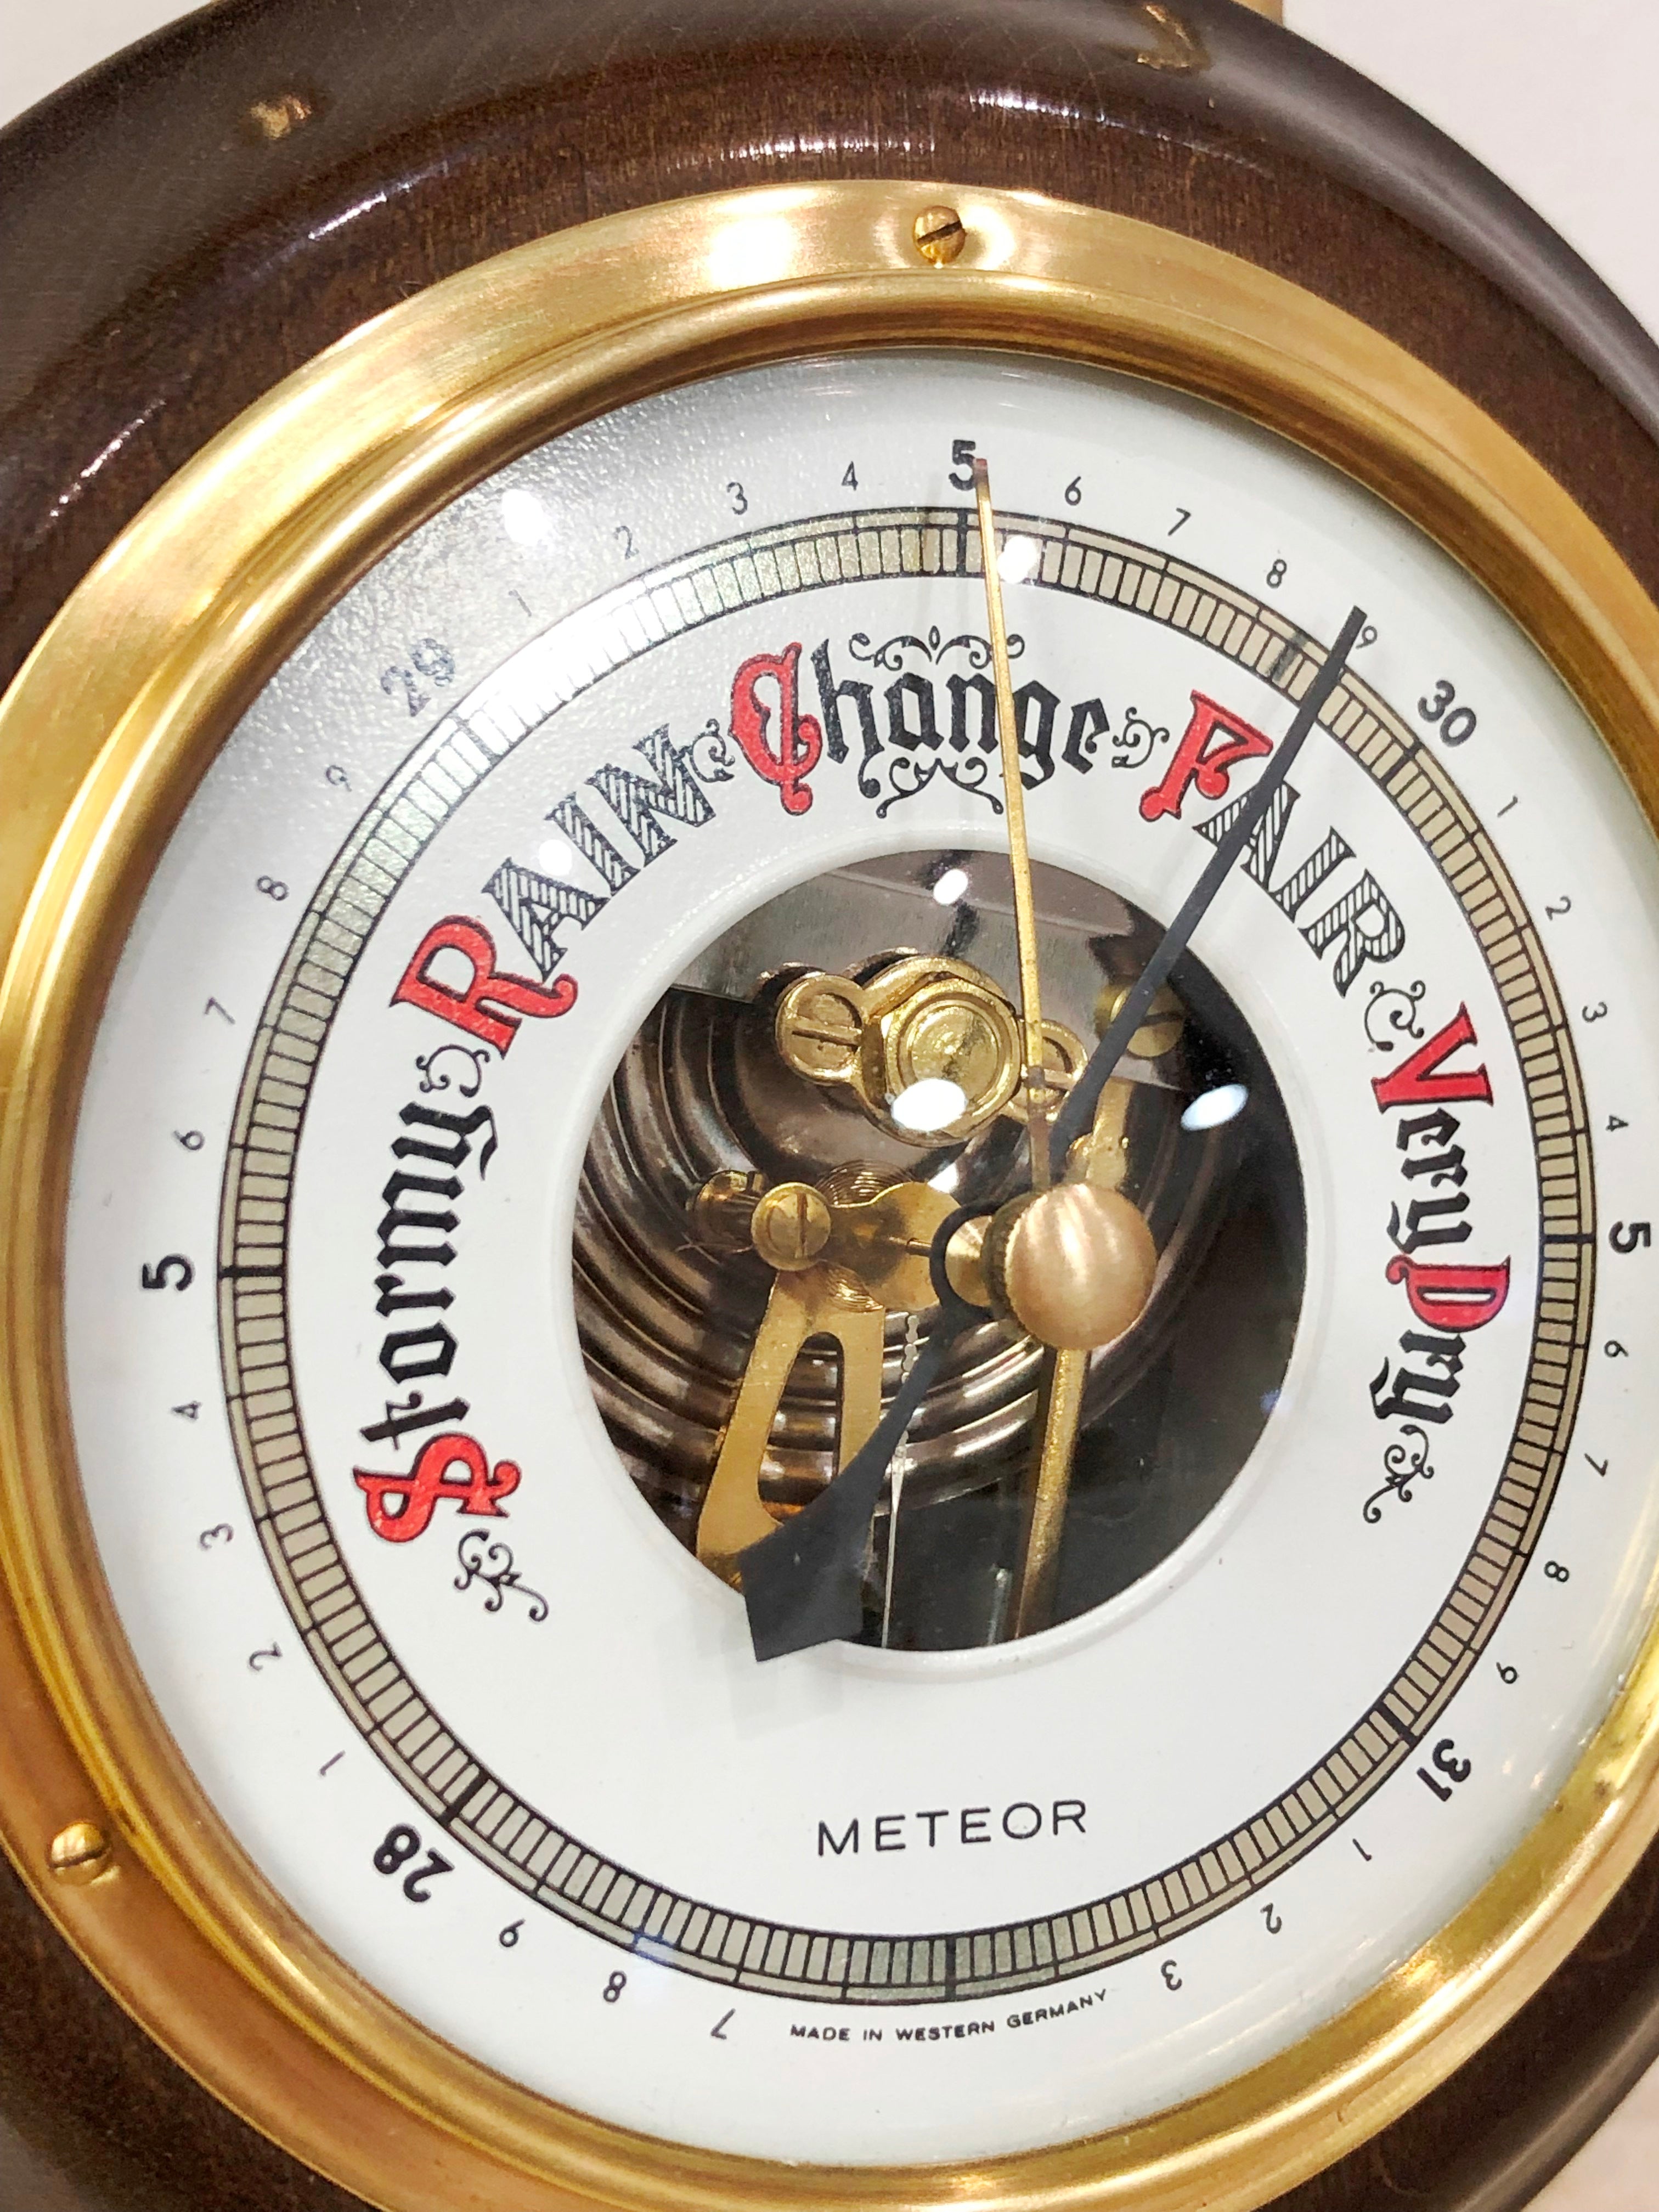 Vintage METEOR Ships Wheel Wall Barometer | eXibit collection